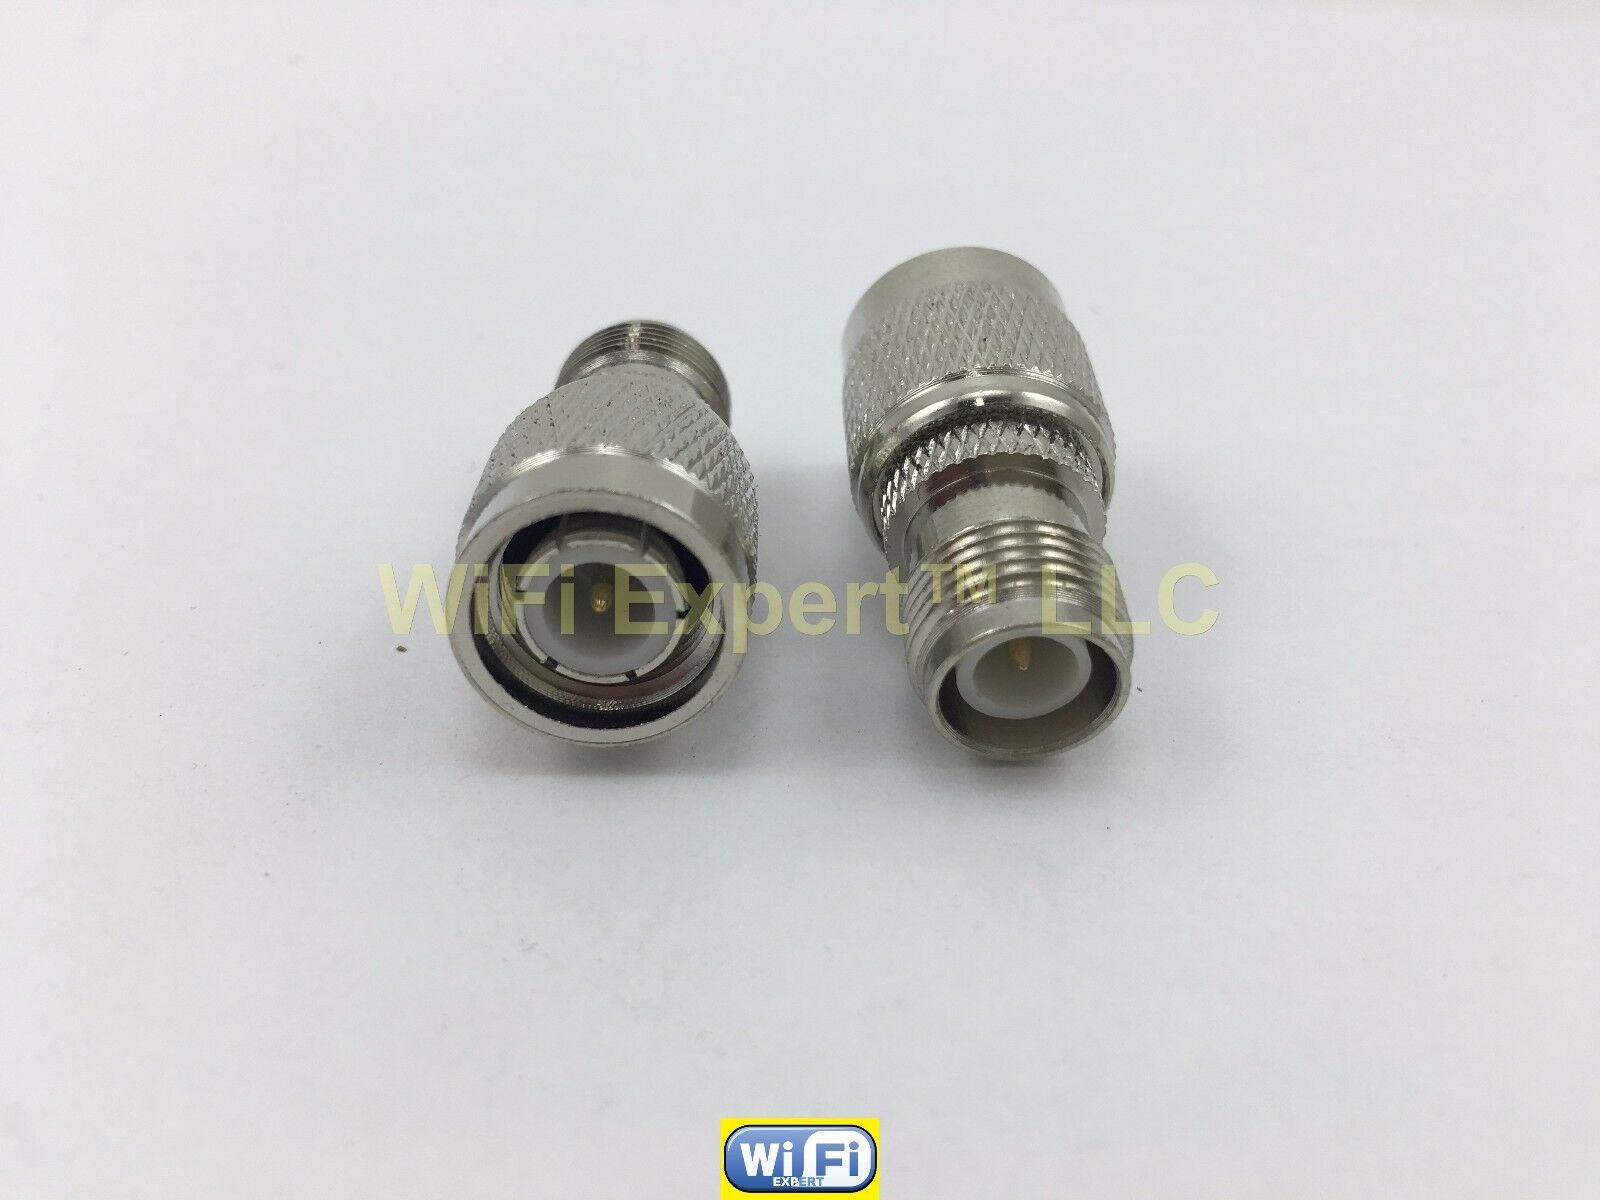 TNC to RP-TNC Adapter Male to Female Plug to Jack Convert TNC to RPTNC vise vers